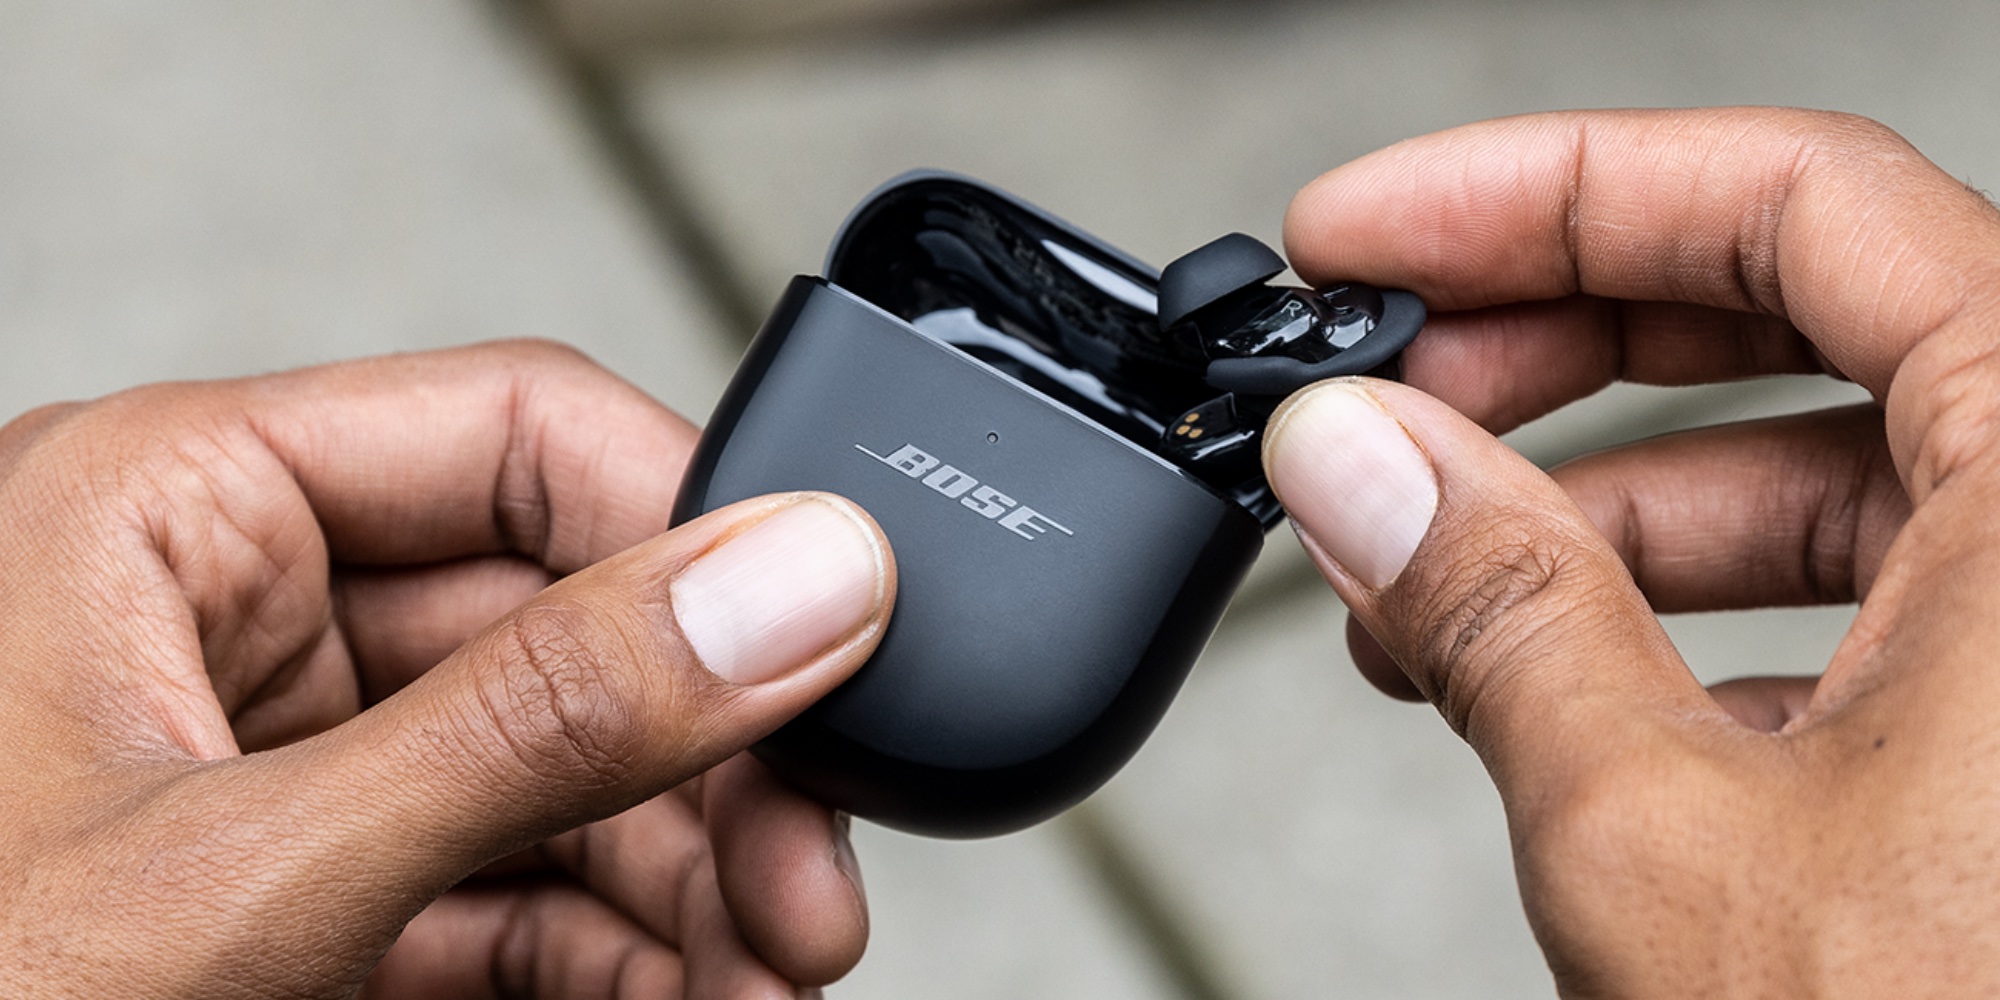 Bose QuietComfort earbuds arrive to take on Apple's latest